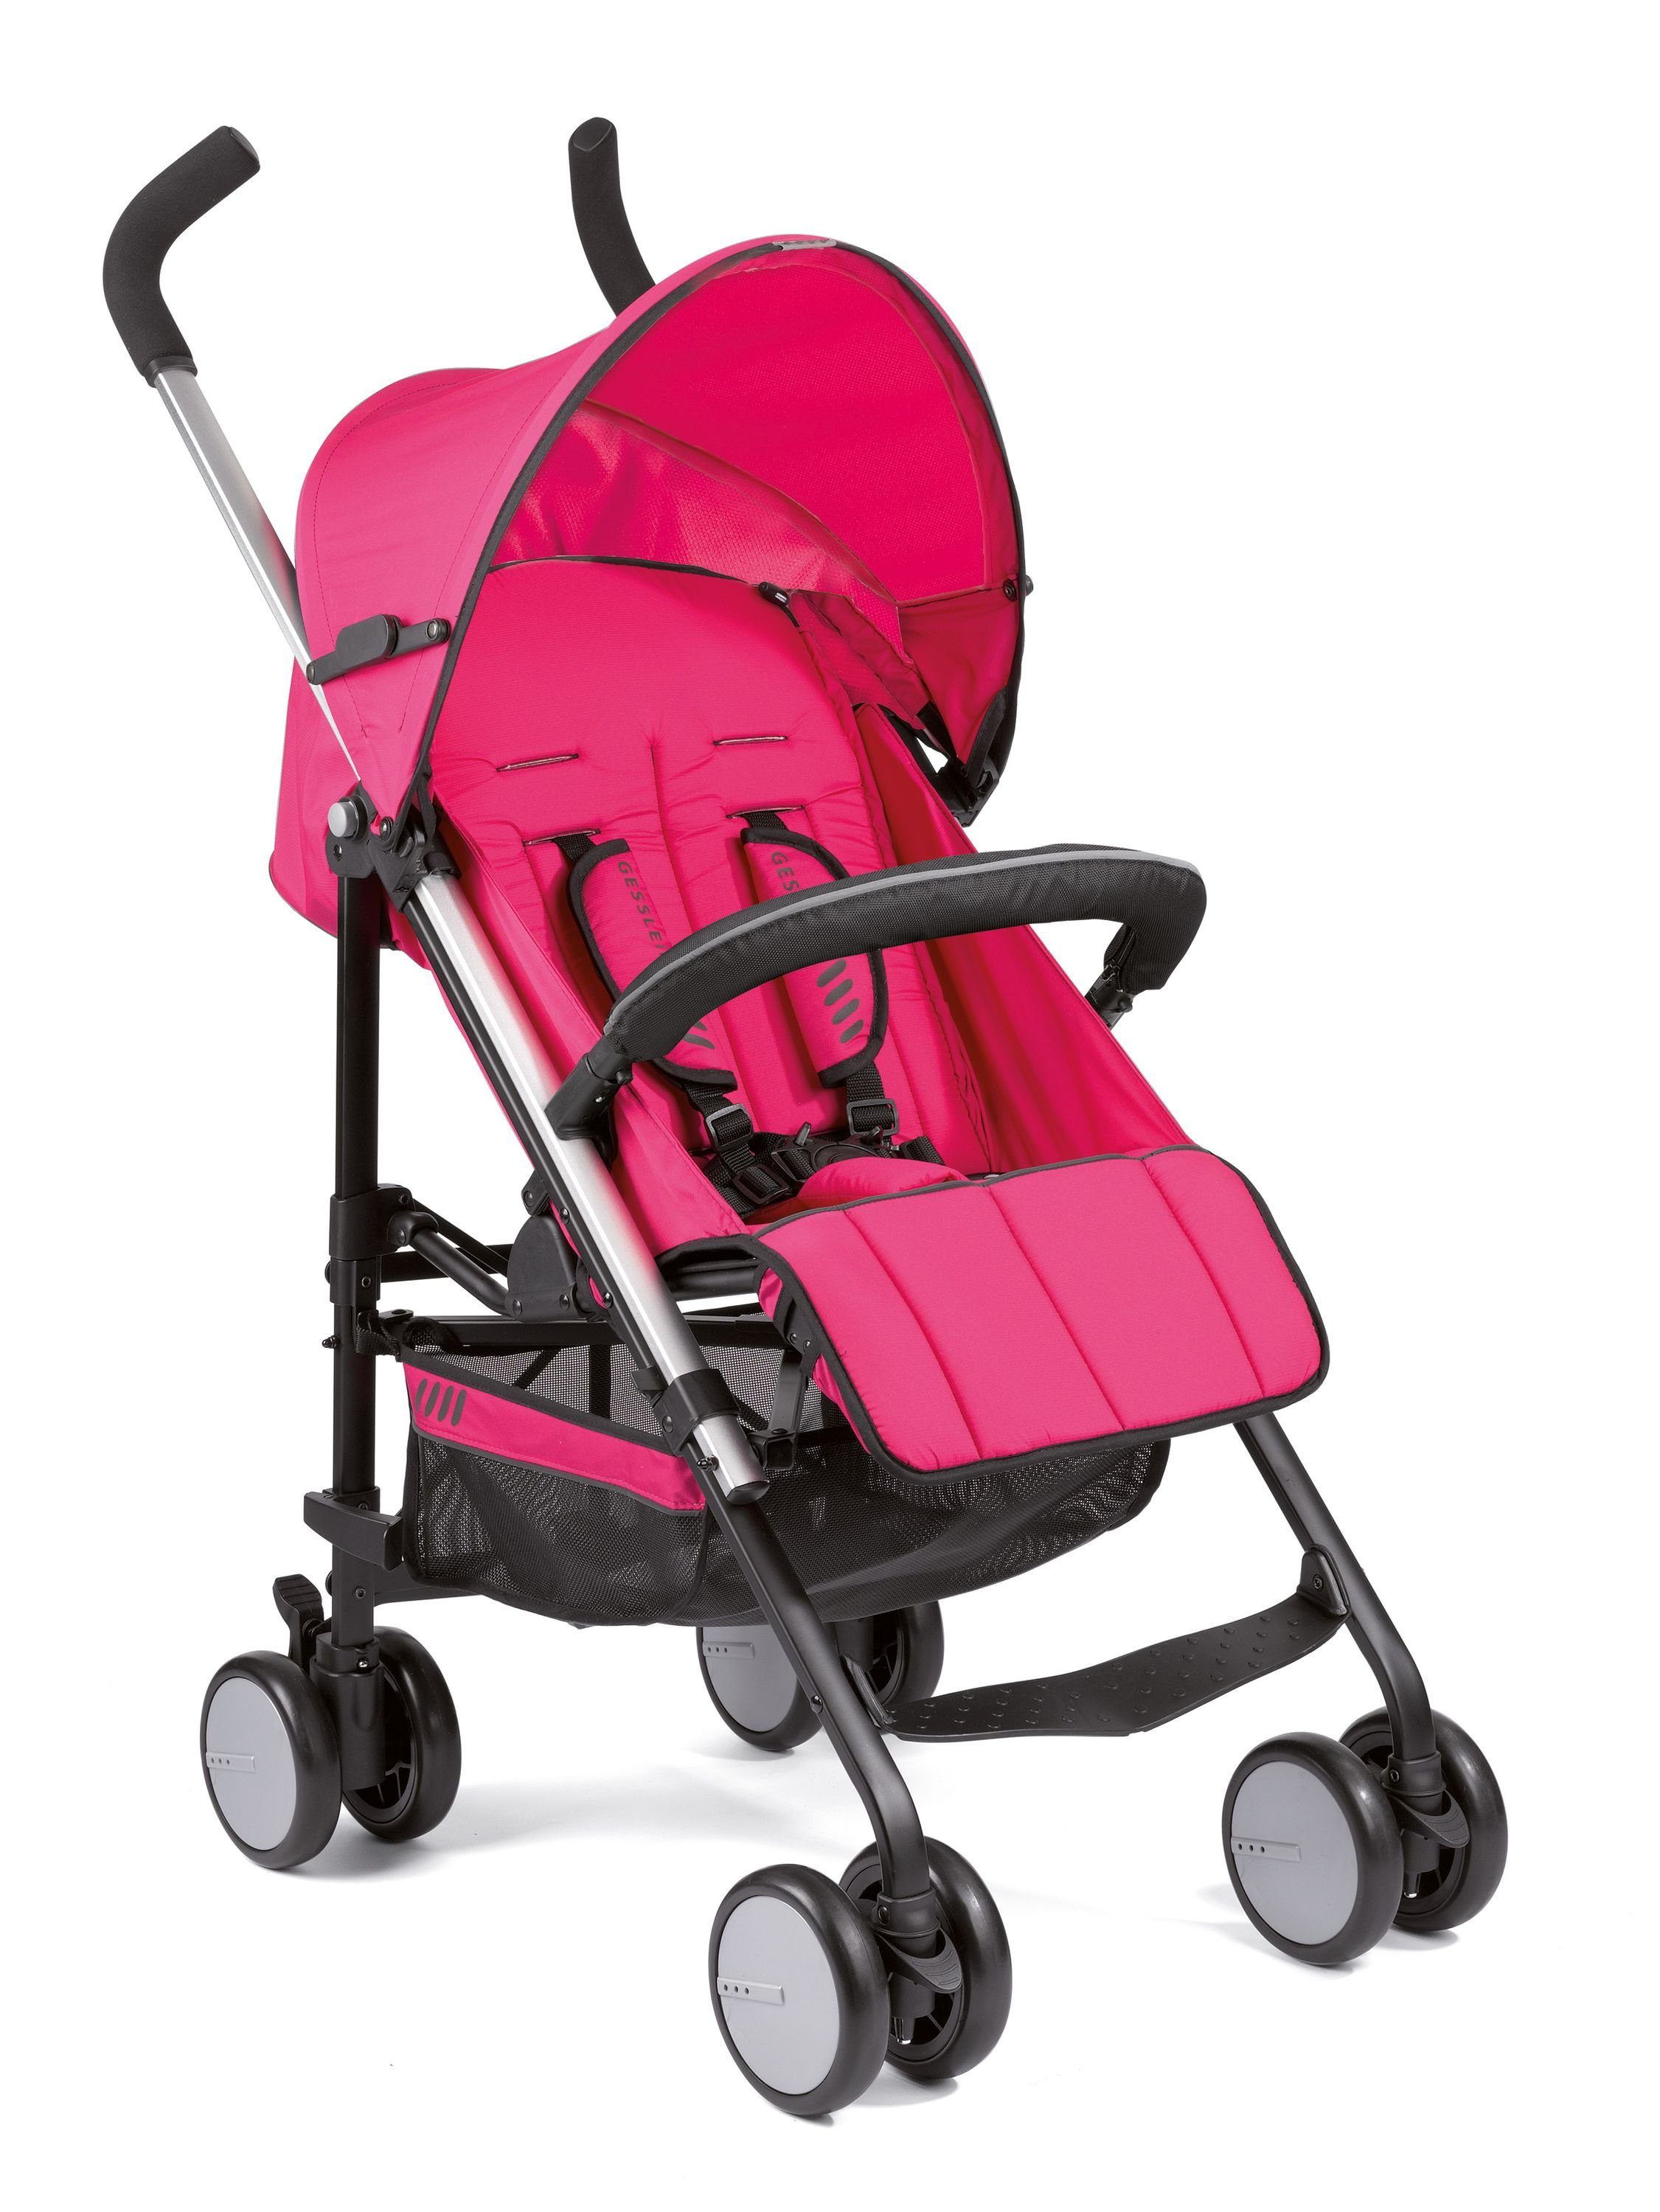 Rosa Buggy online kaufen » Buggys pink | OTTO